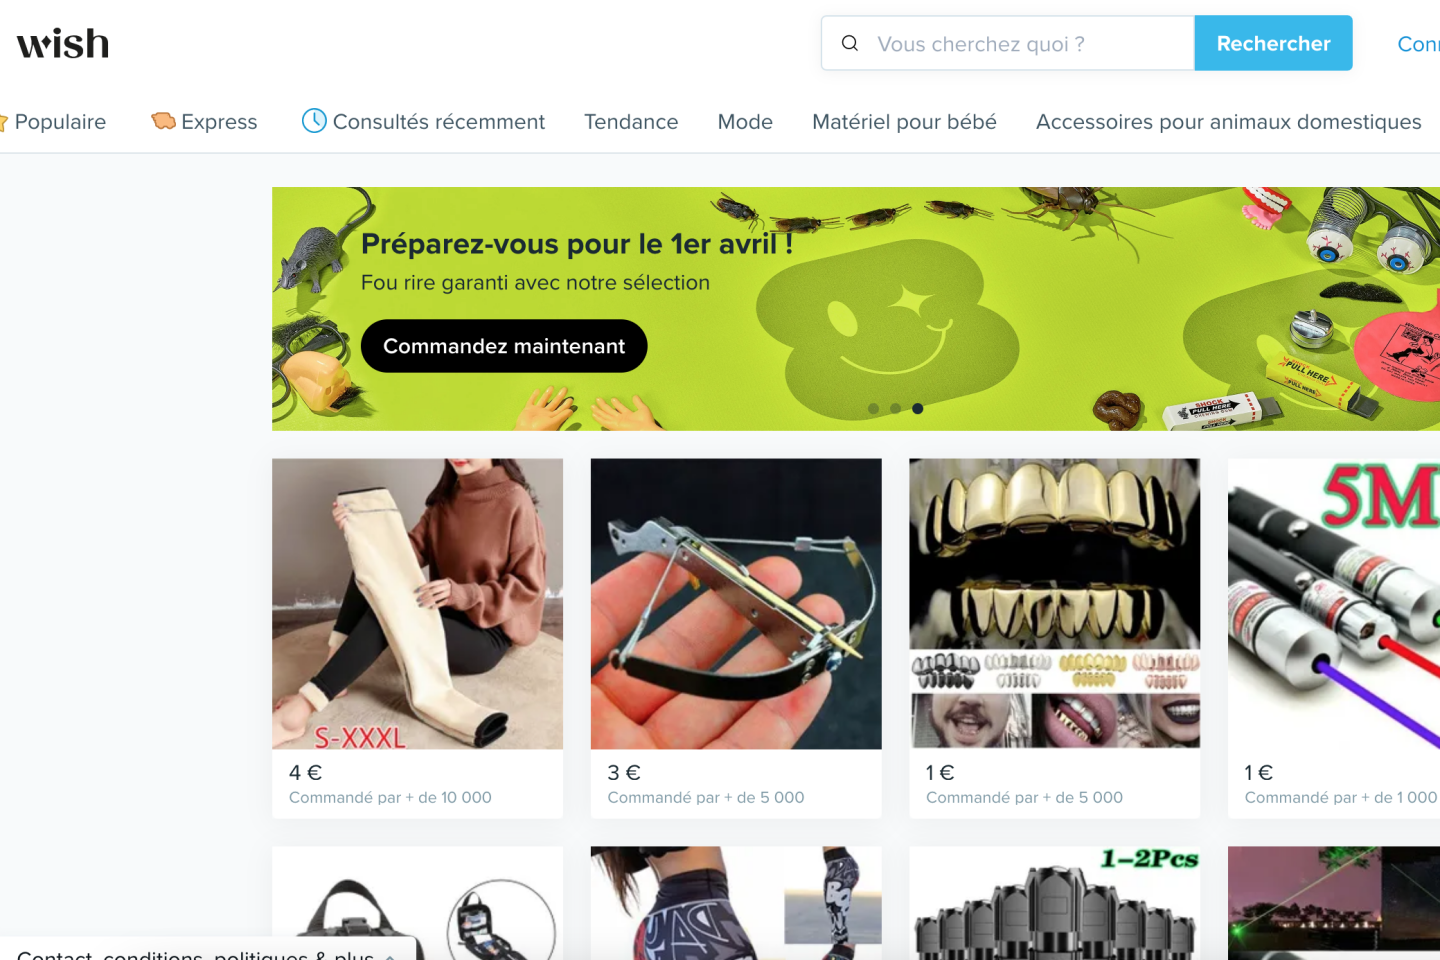 Wish, an online sales site, is back on French search engines